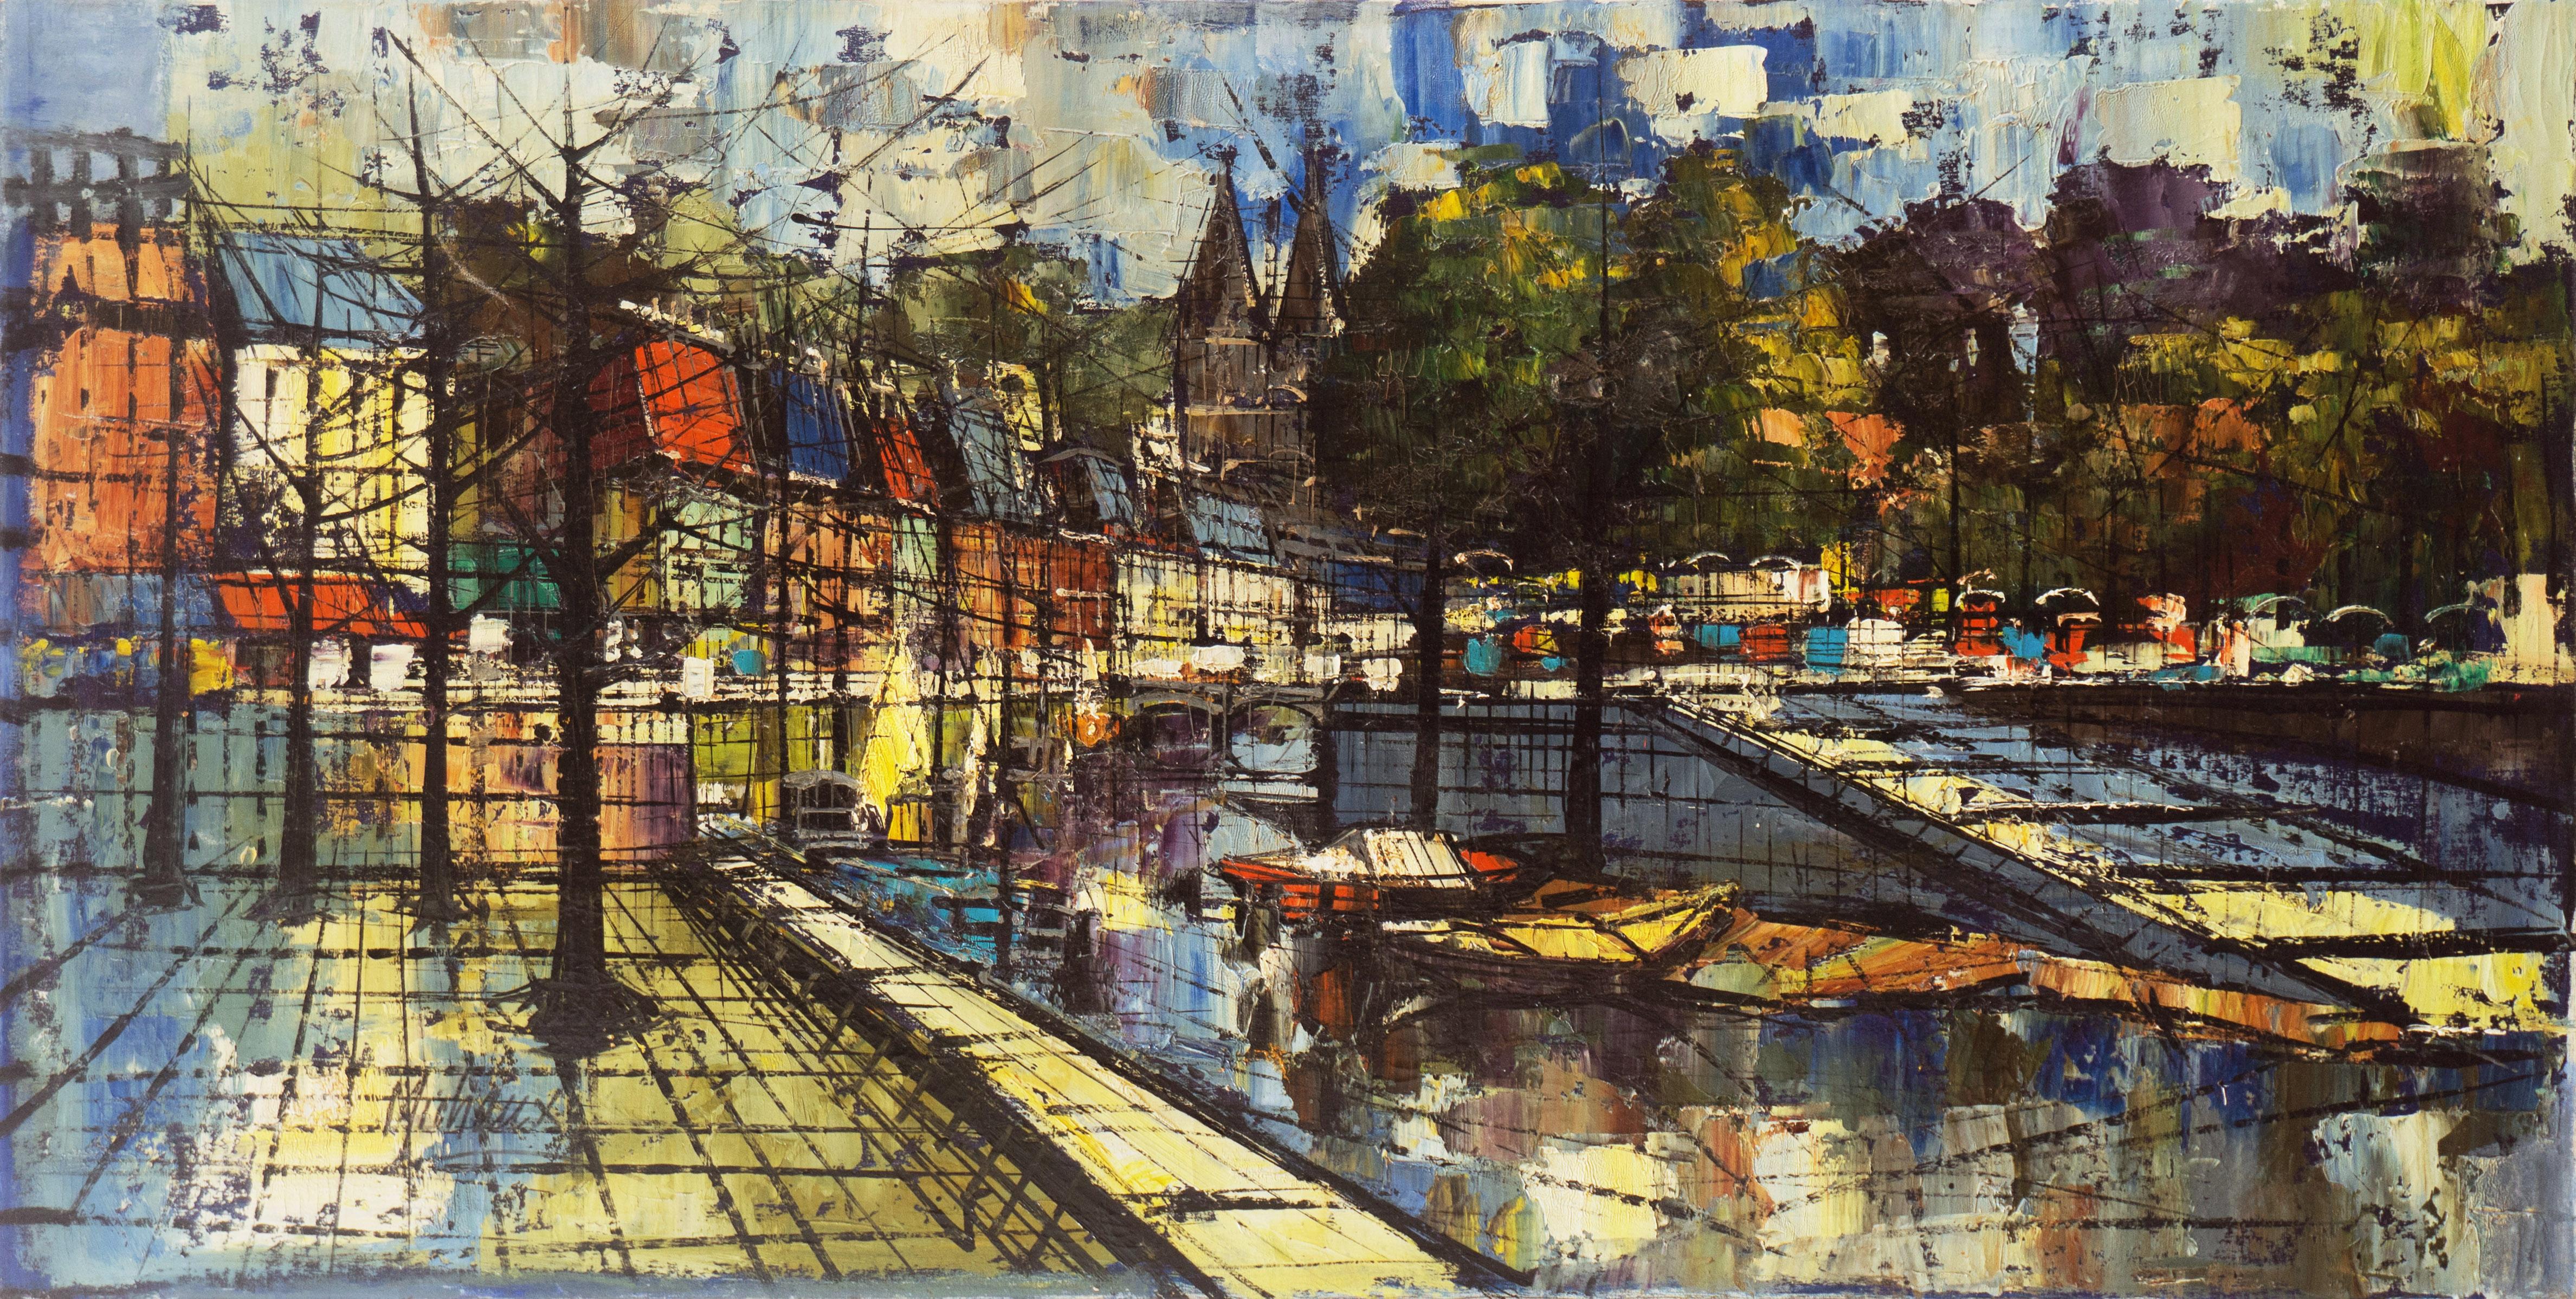 Michaux Landscape Painting - 'Cityscape with Canals', Large Expressionist Oil, Style of Bernard Buffet, Urban